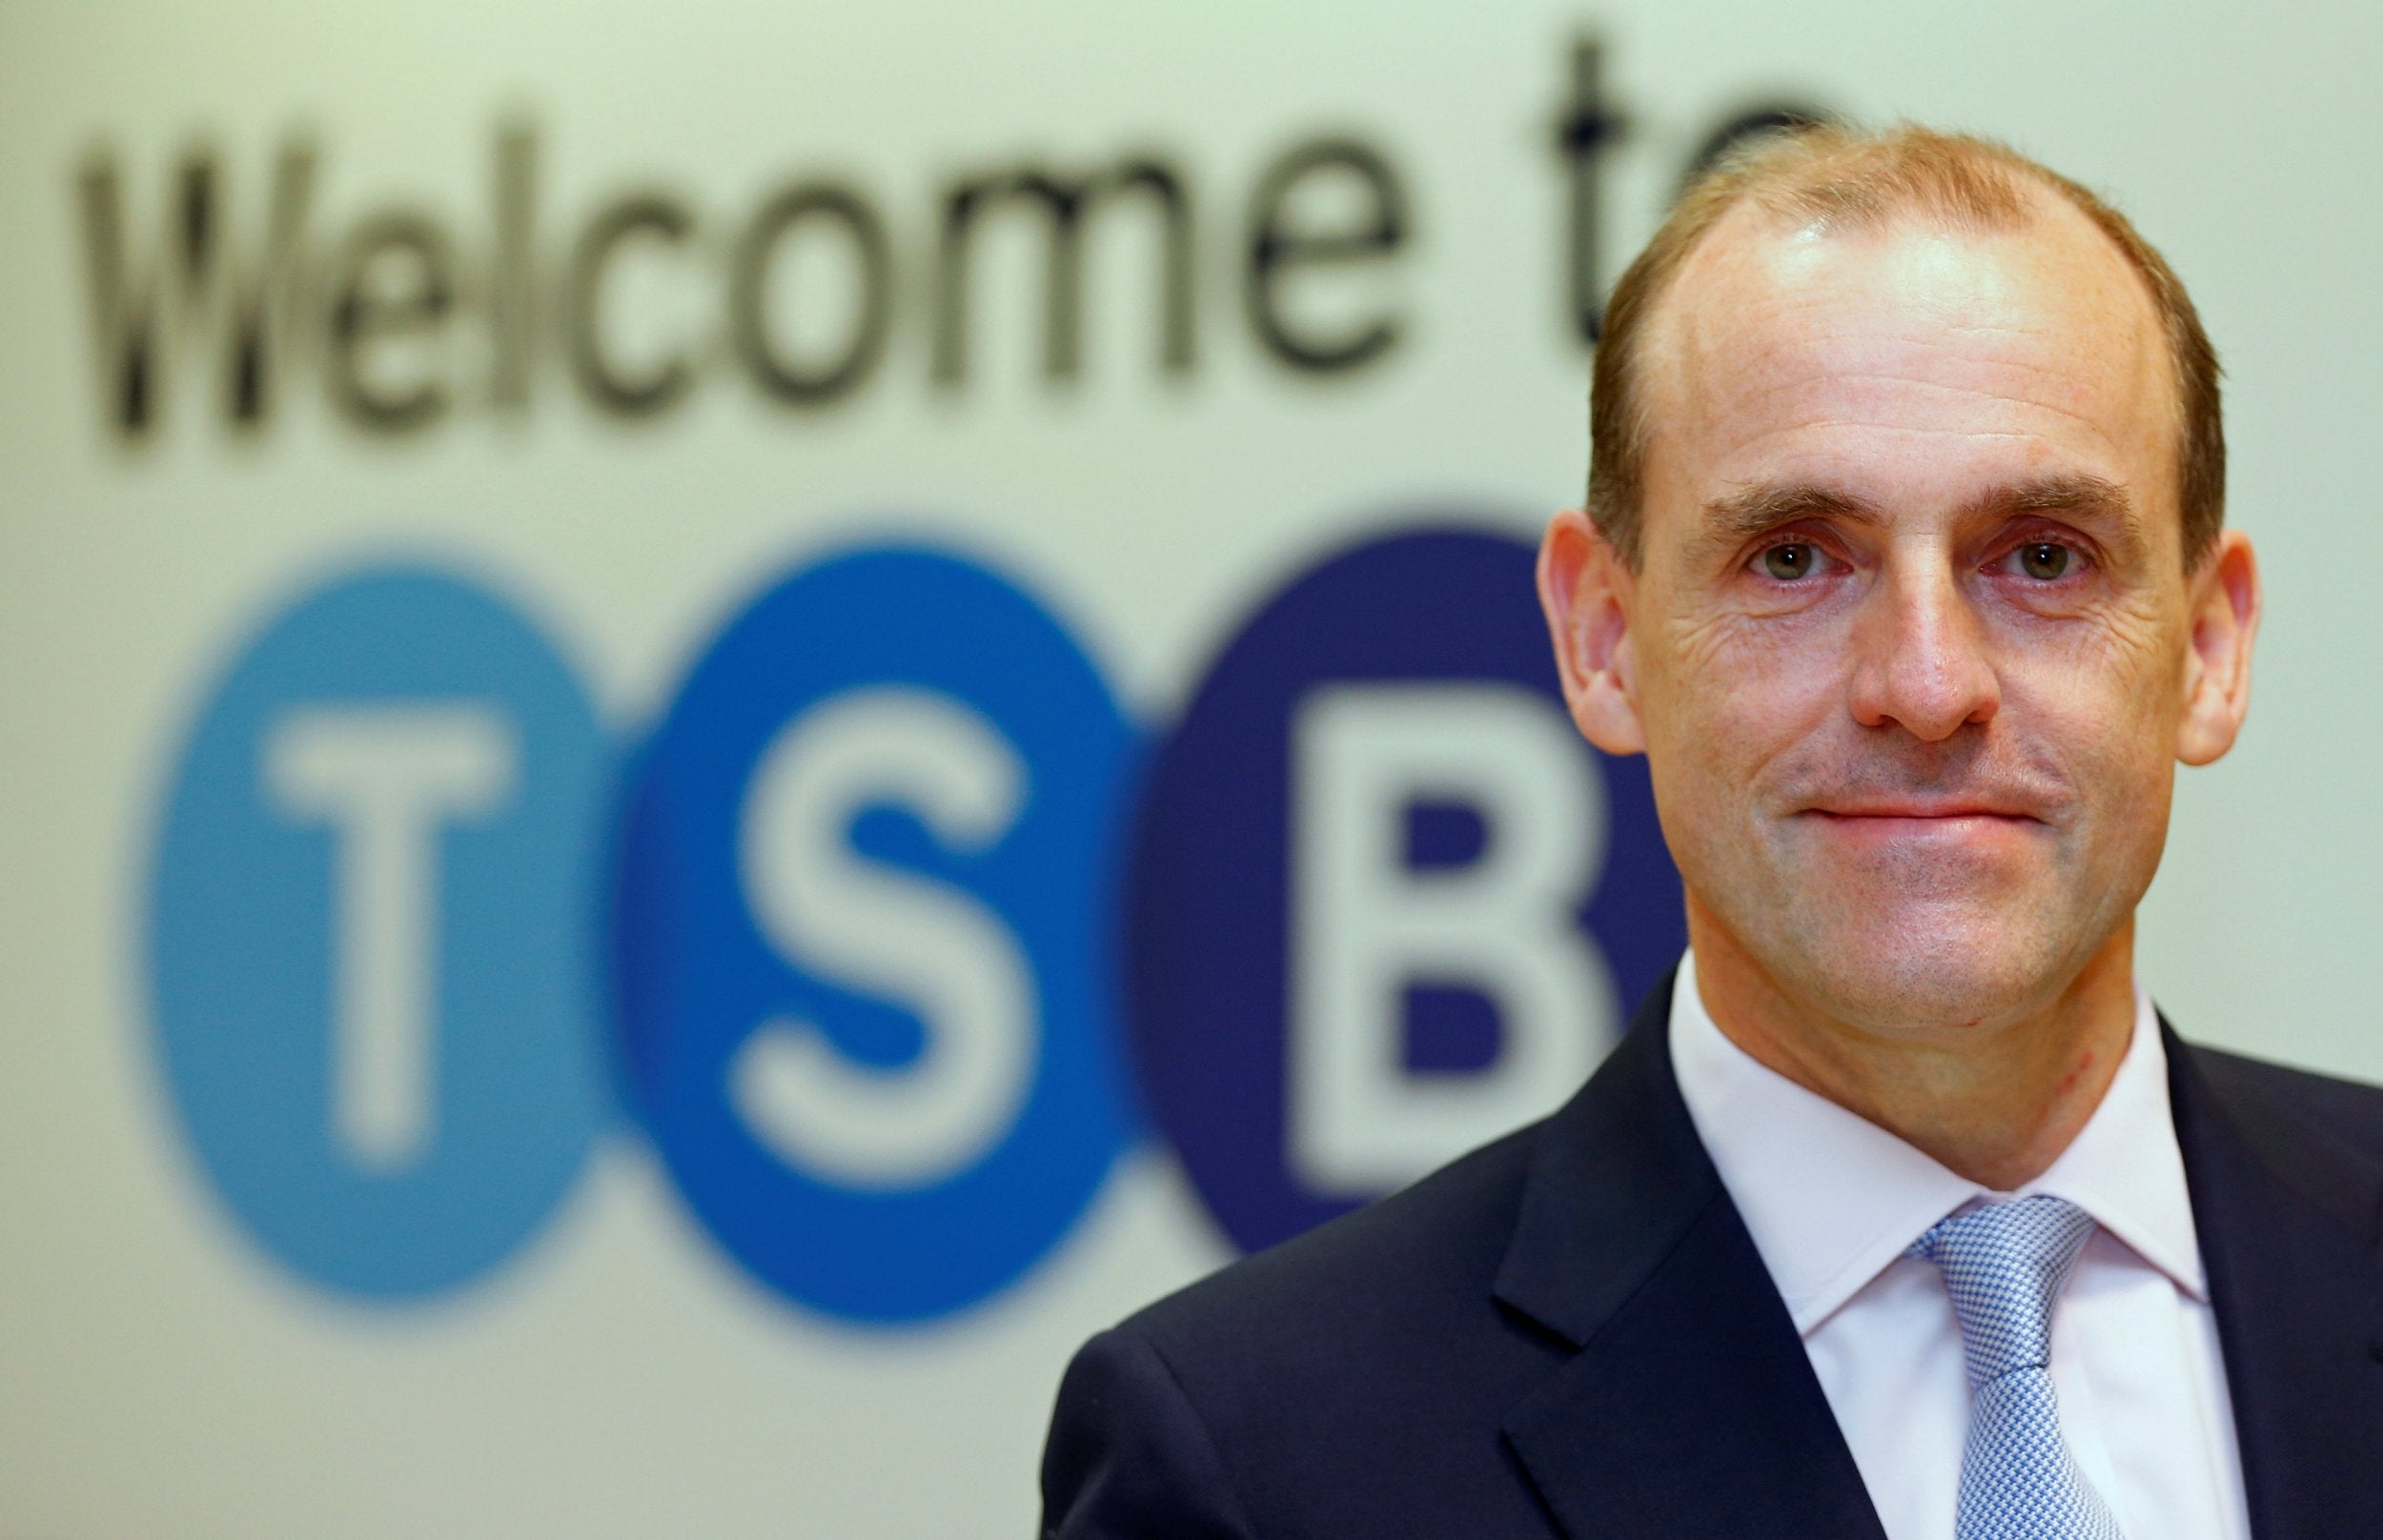 TSB CEO Paul Pester apologised to customers for the bank's IT problems in April